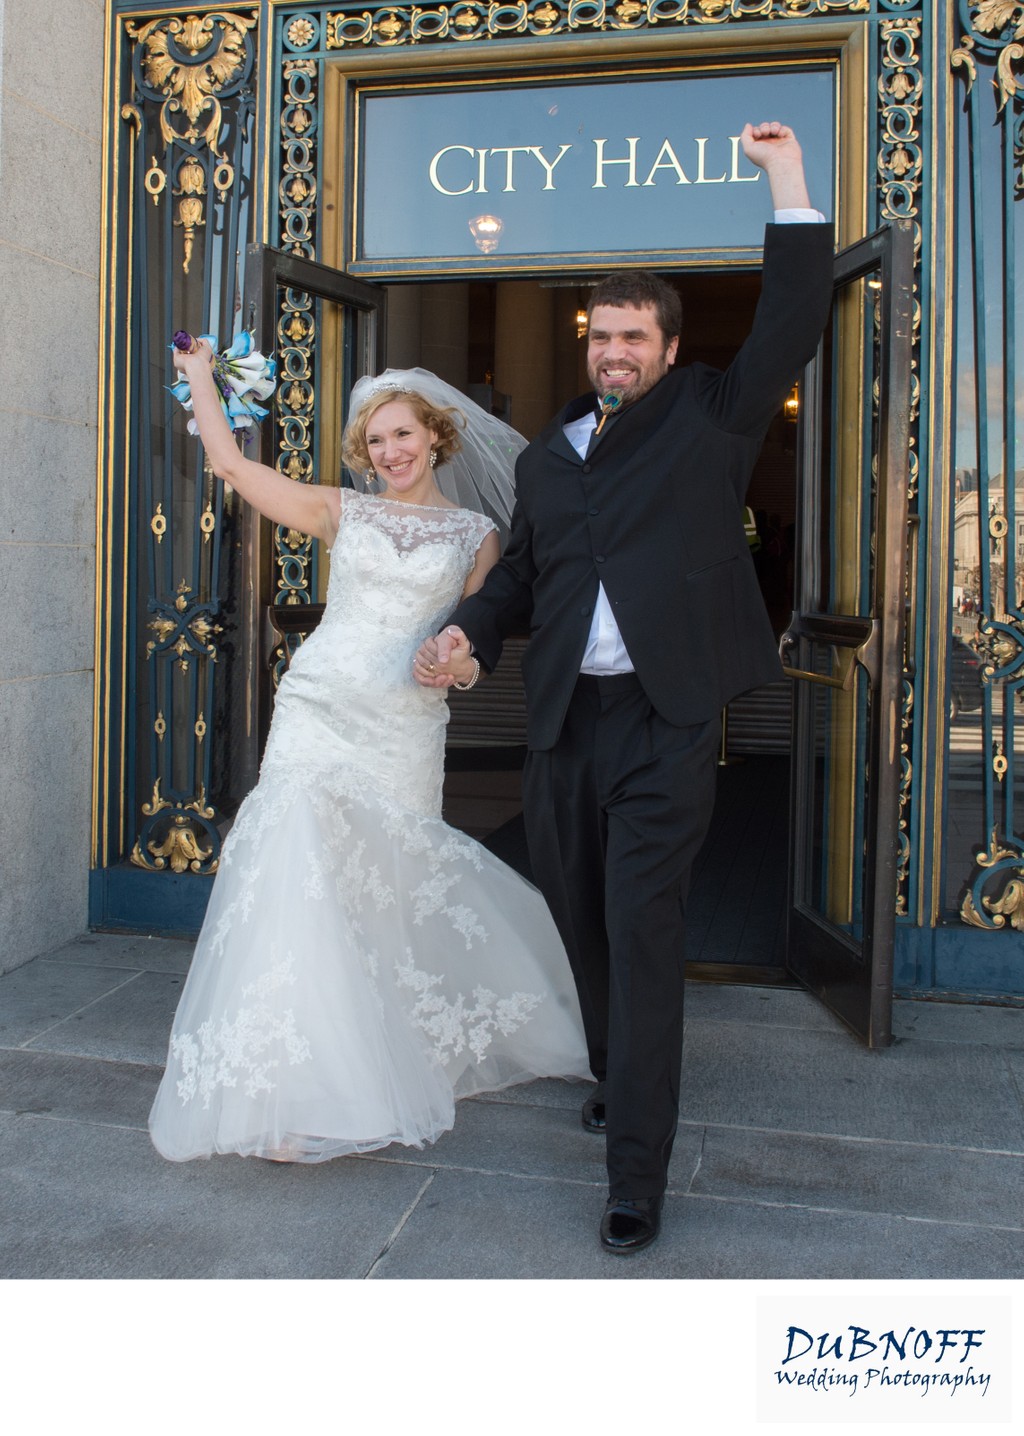 Bride and groom happily exiting San Francisco city hall after wedding